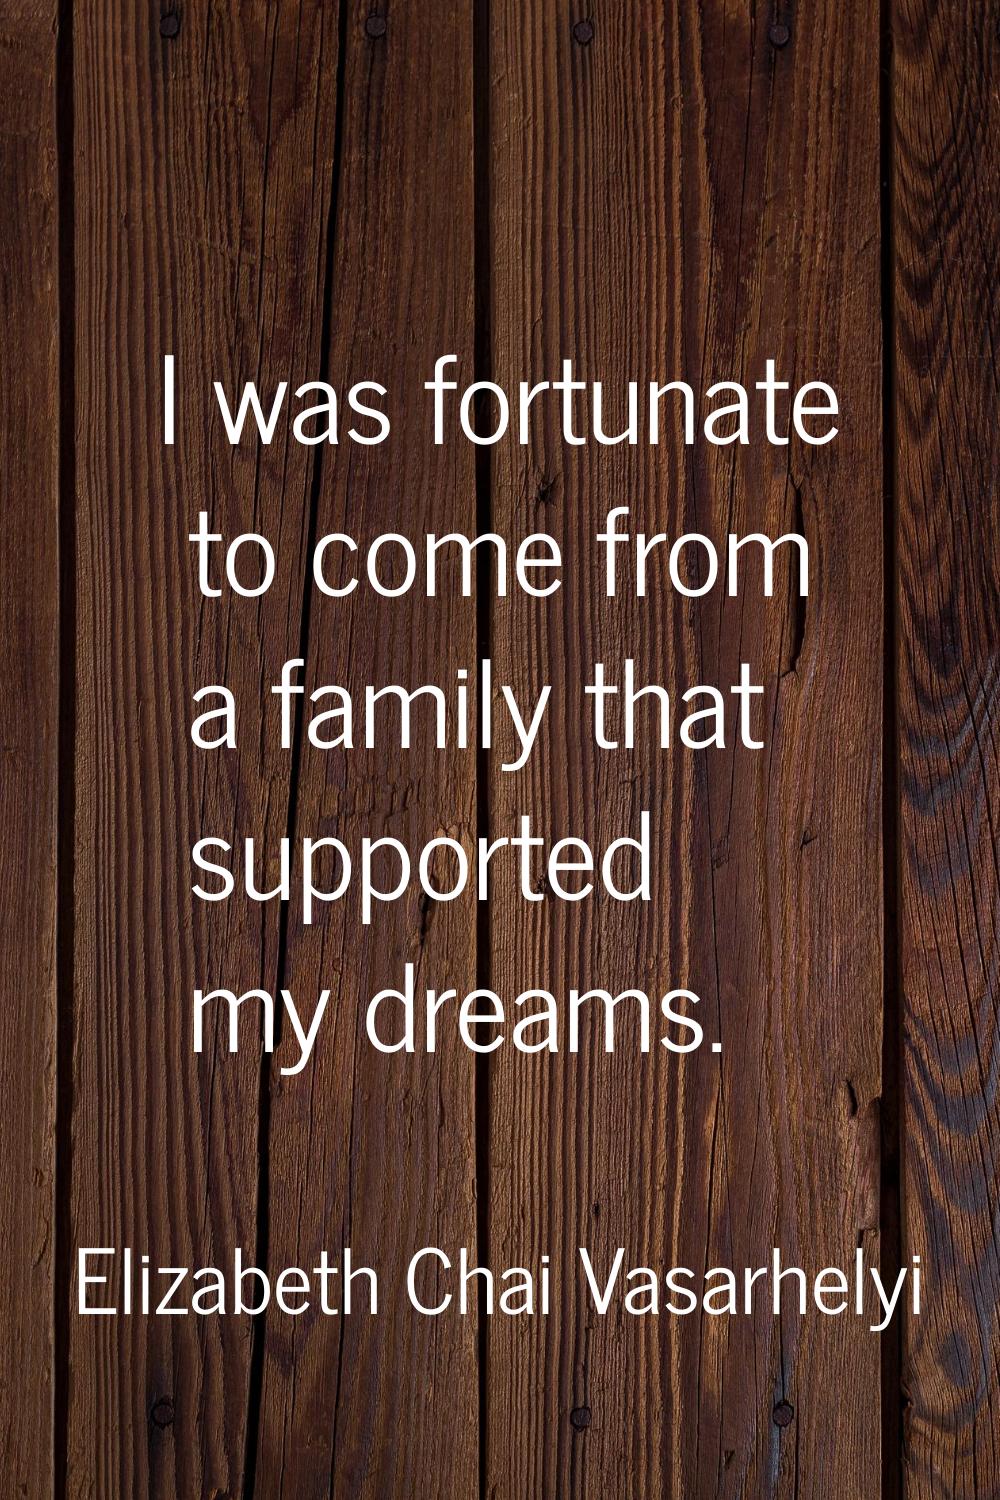 I was fortunate to come from a family that supported my dreams.